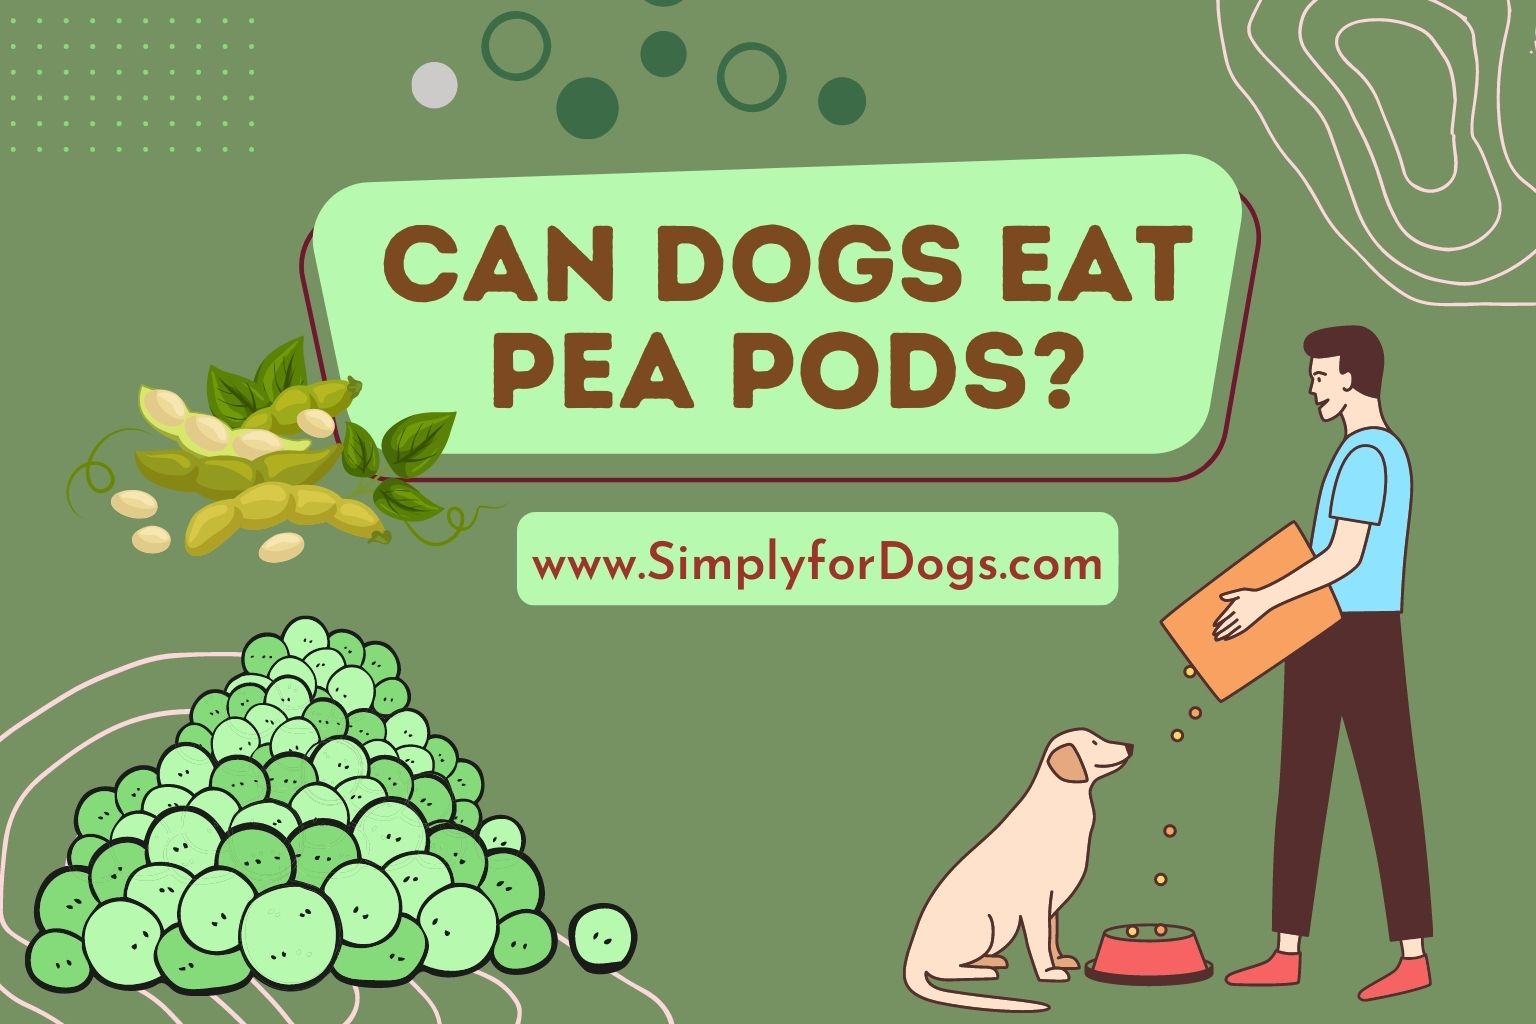 can dogs eat pea pods